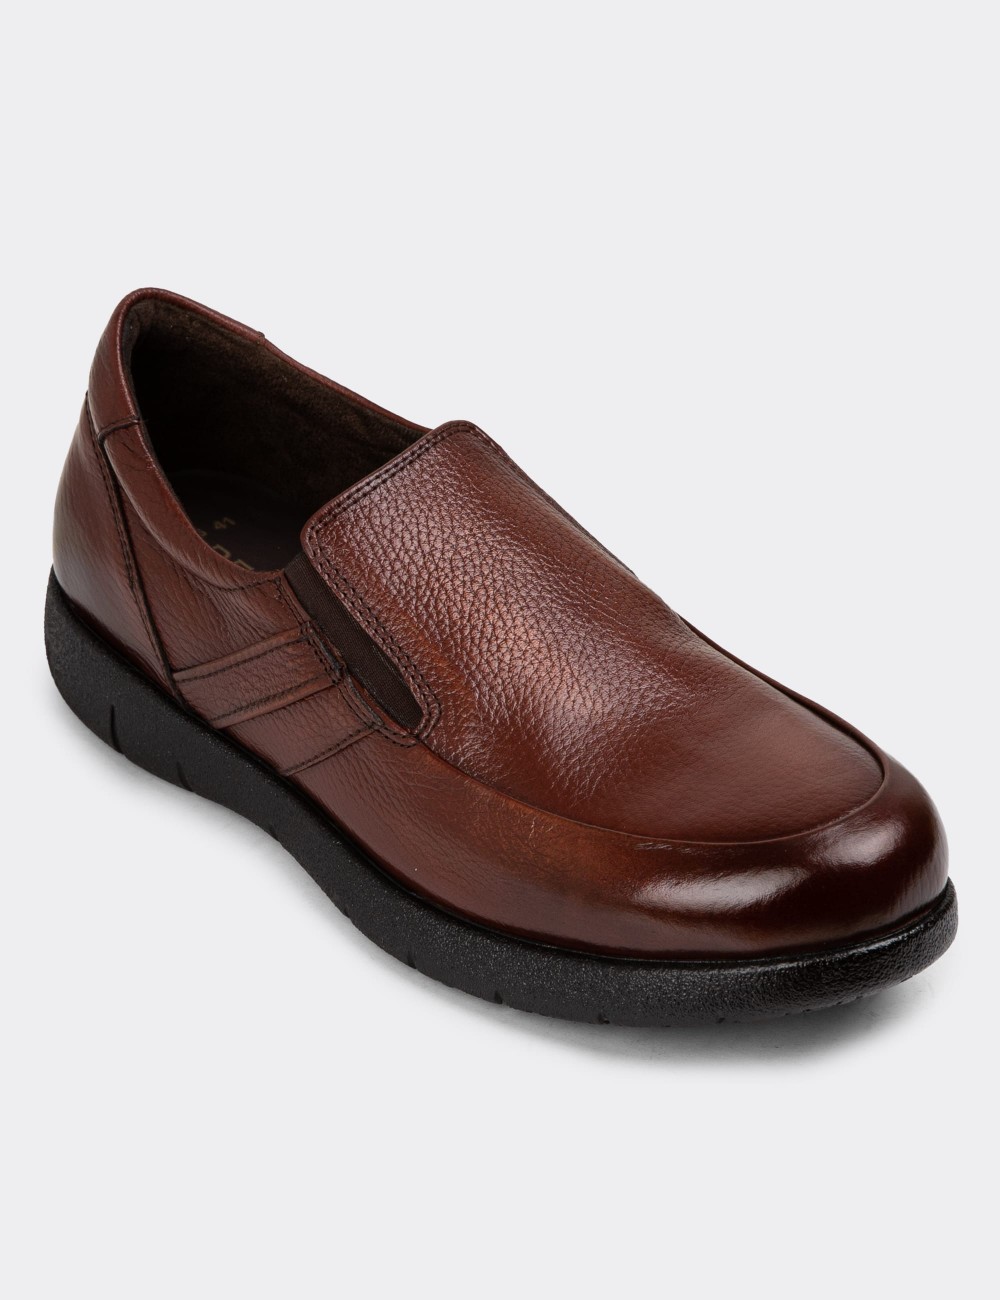 Copper Leather Loafers - 01946MBKRC01